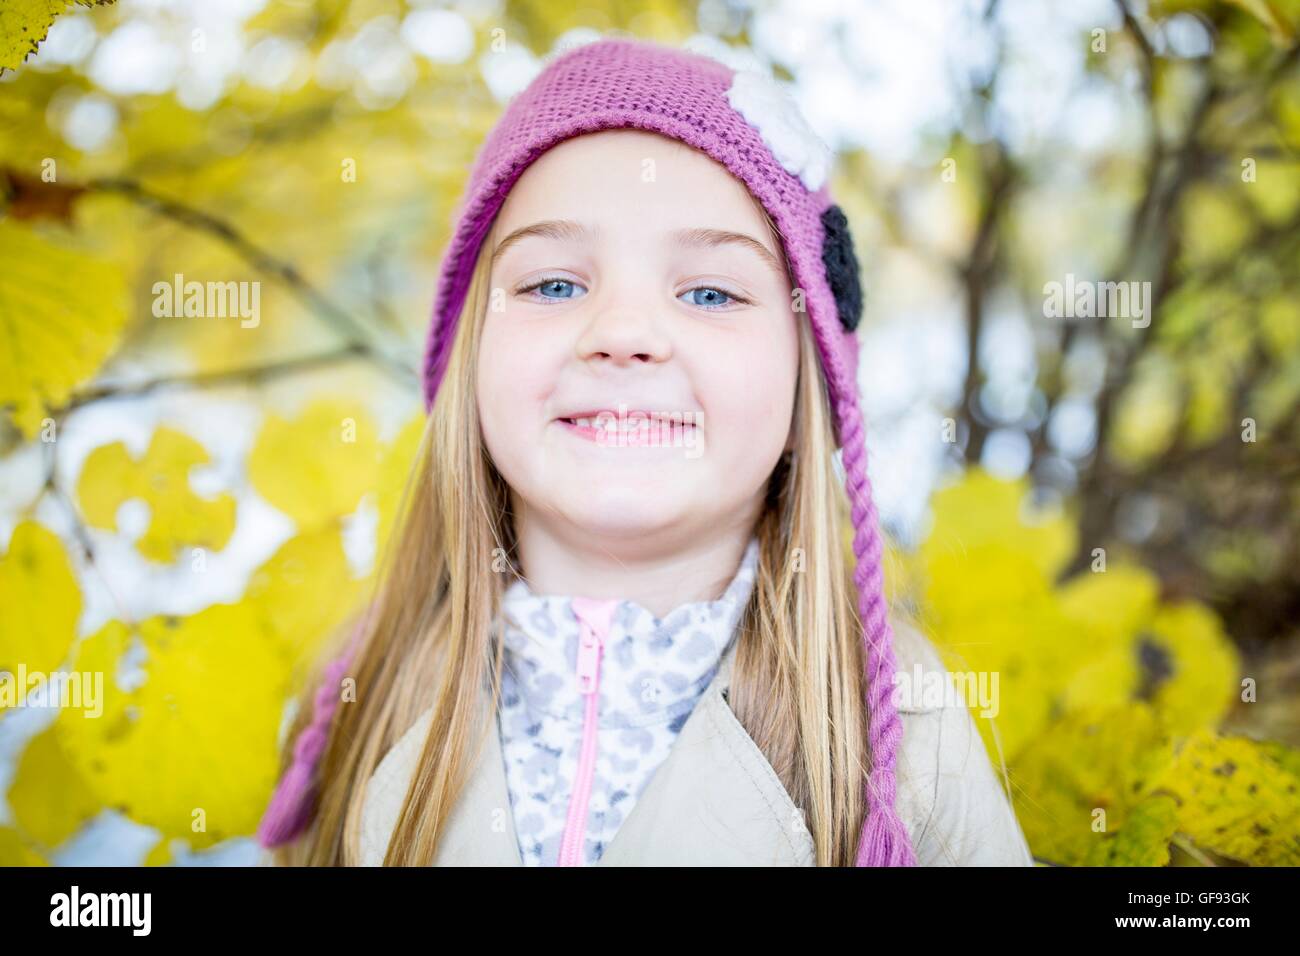 MODEL RELEASED. Blonde girl wearing woolly hat and smiling, close-up, portrait. Stock Photo